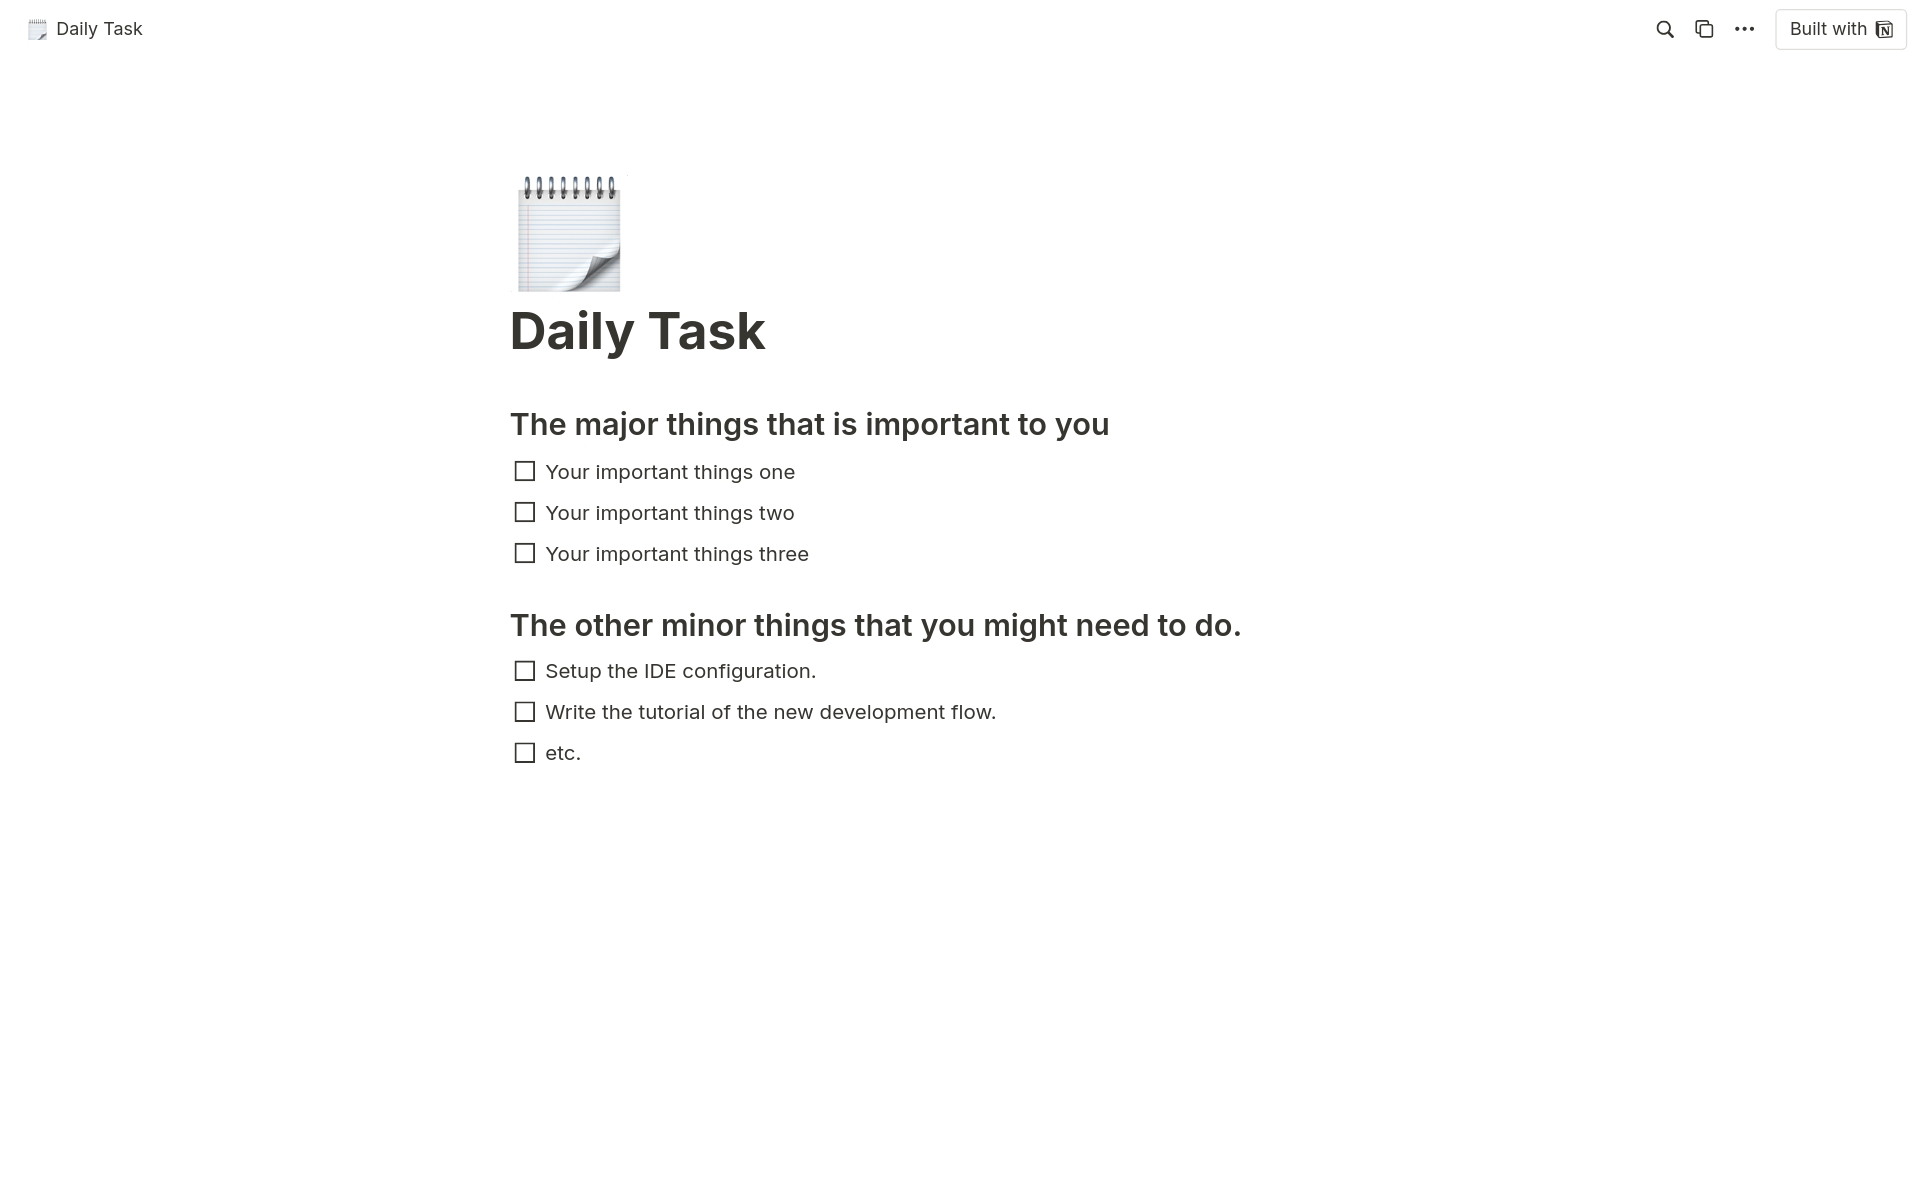 The template is for recording daily tasks with three major things and other minor things.